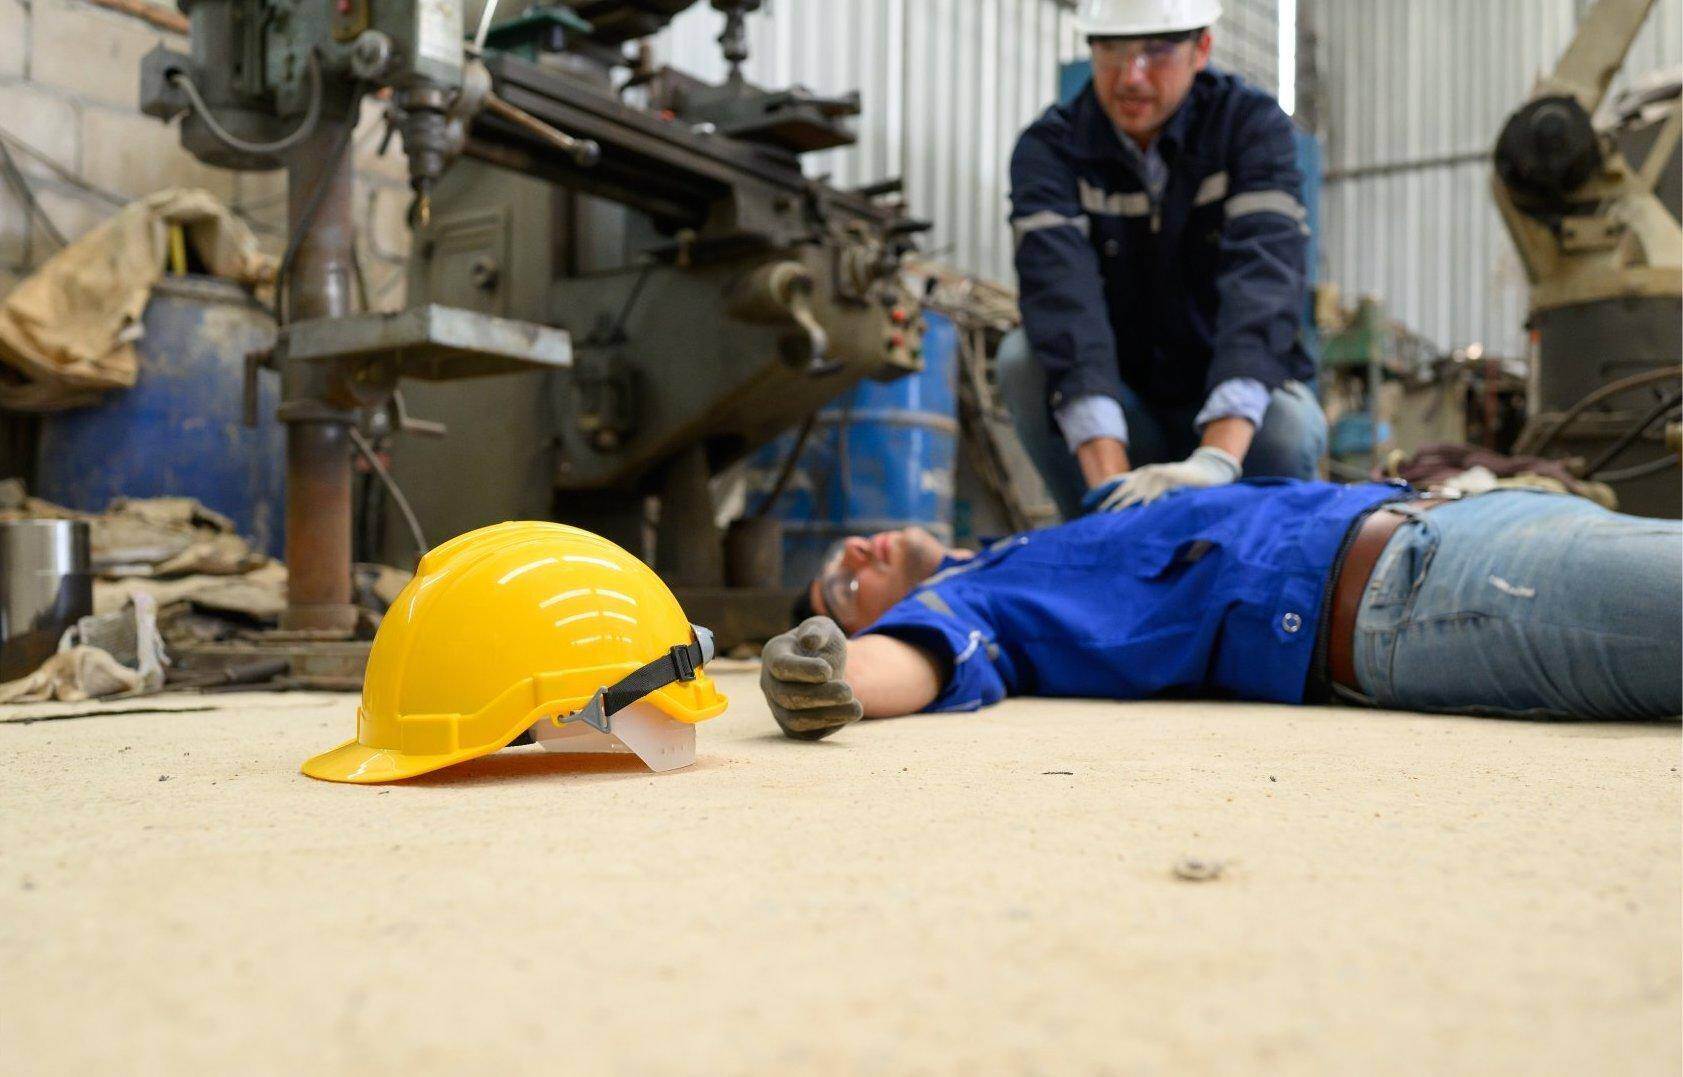 An unconscious man who has been injured on the job who will file for workers compensation in Brunswick, Georgia